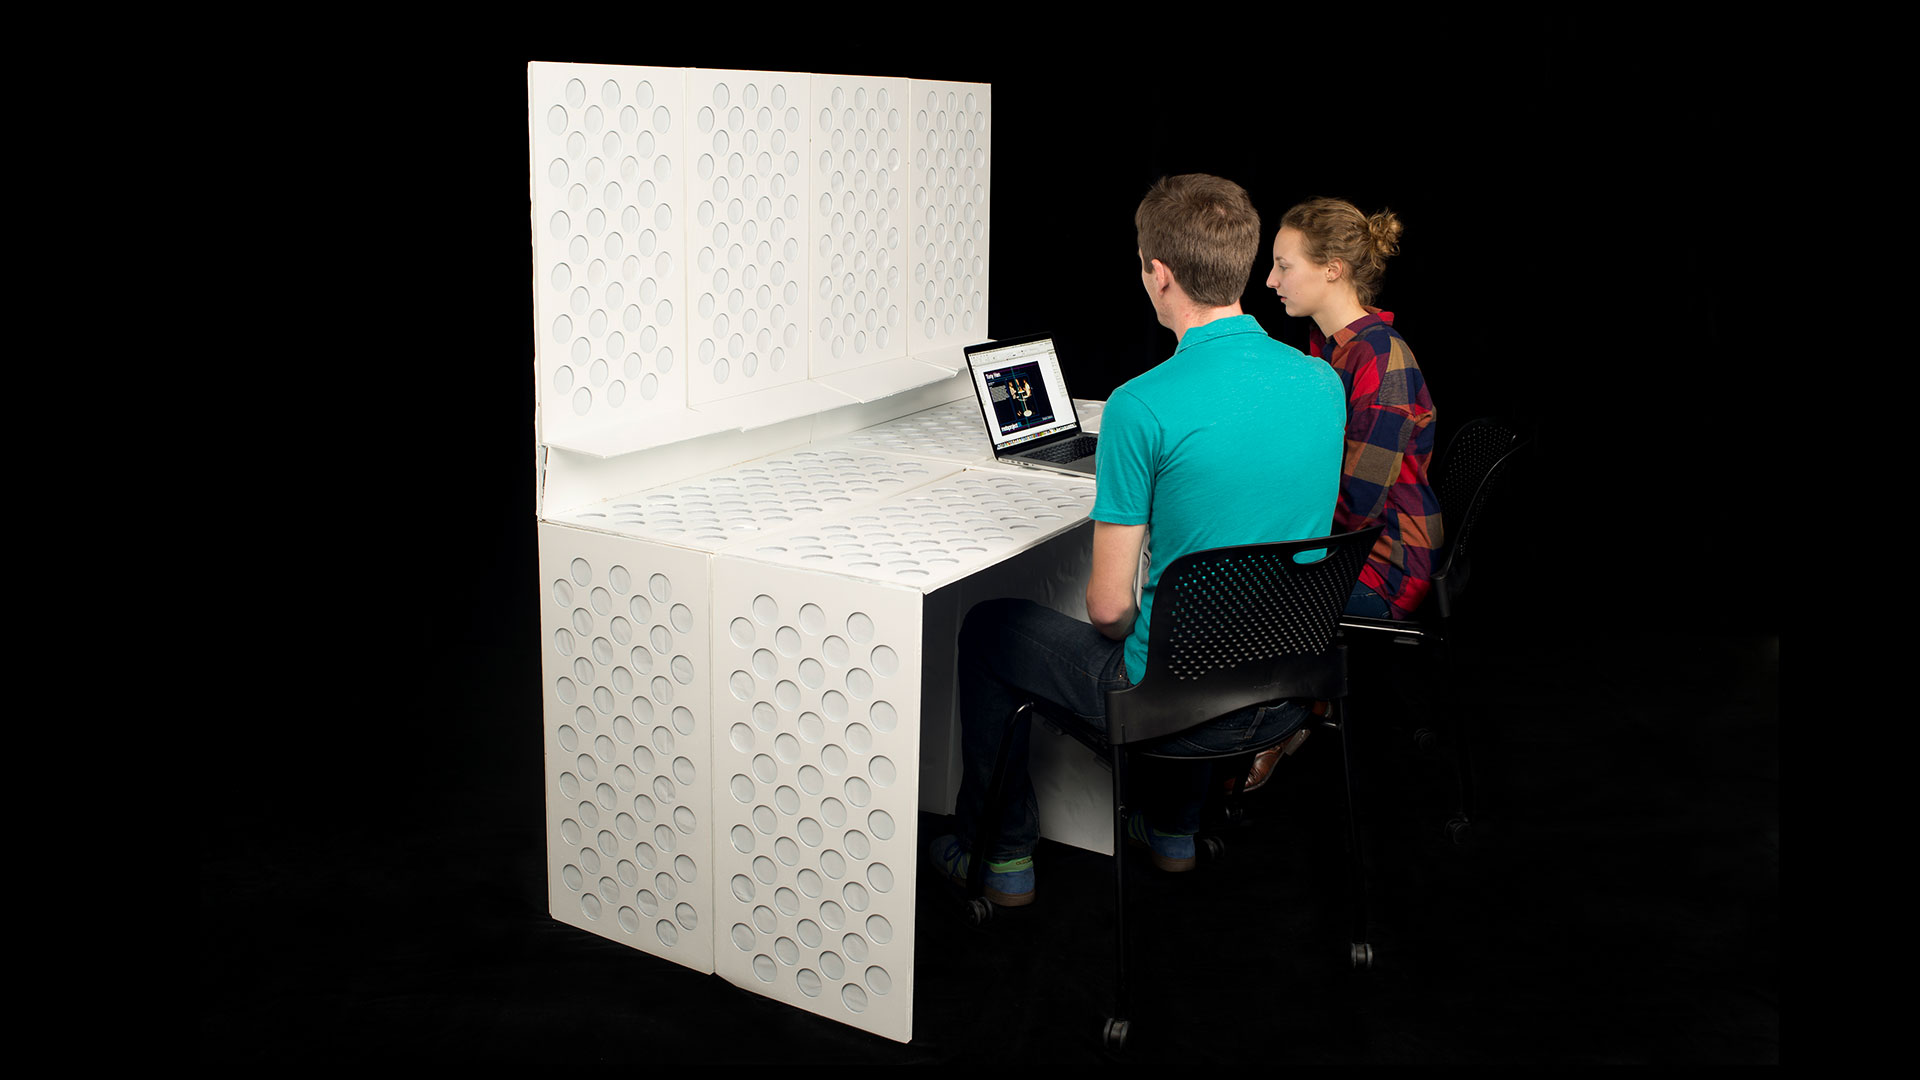 Both students seated on one side of room divider with large portion folded down into mobile desk